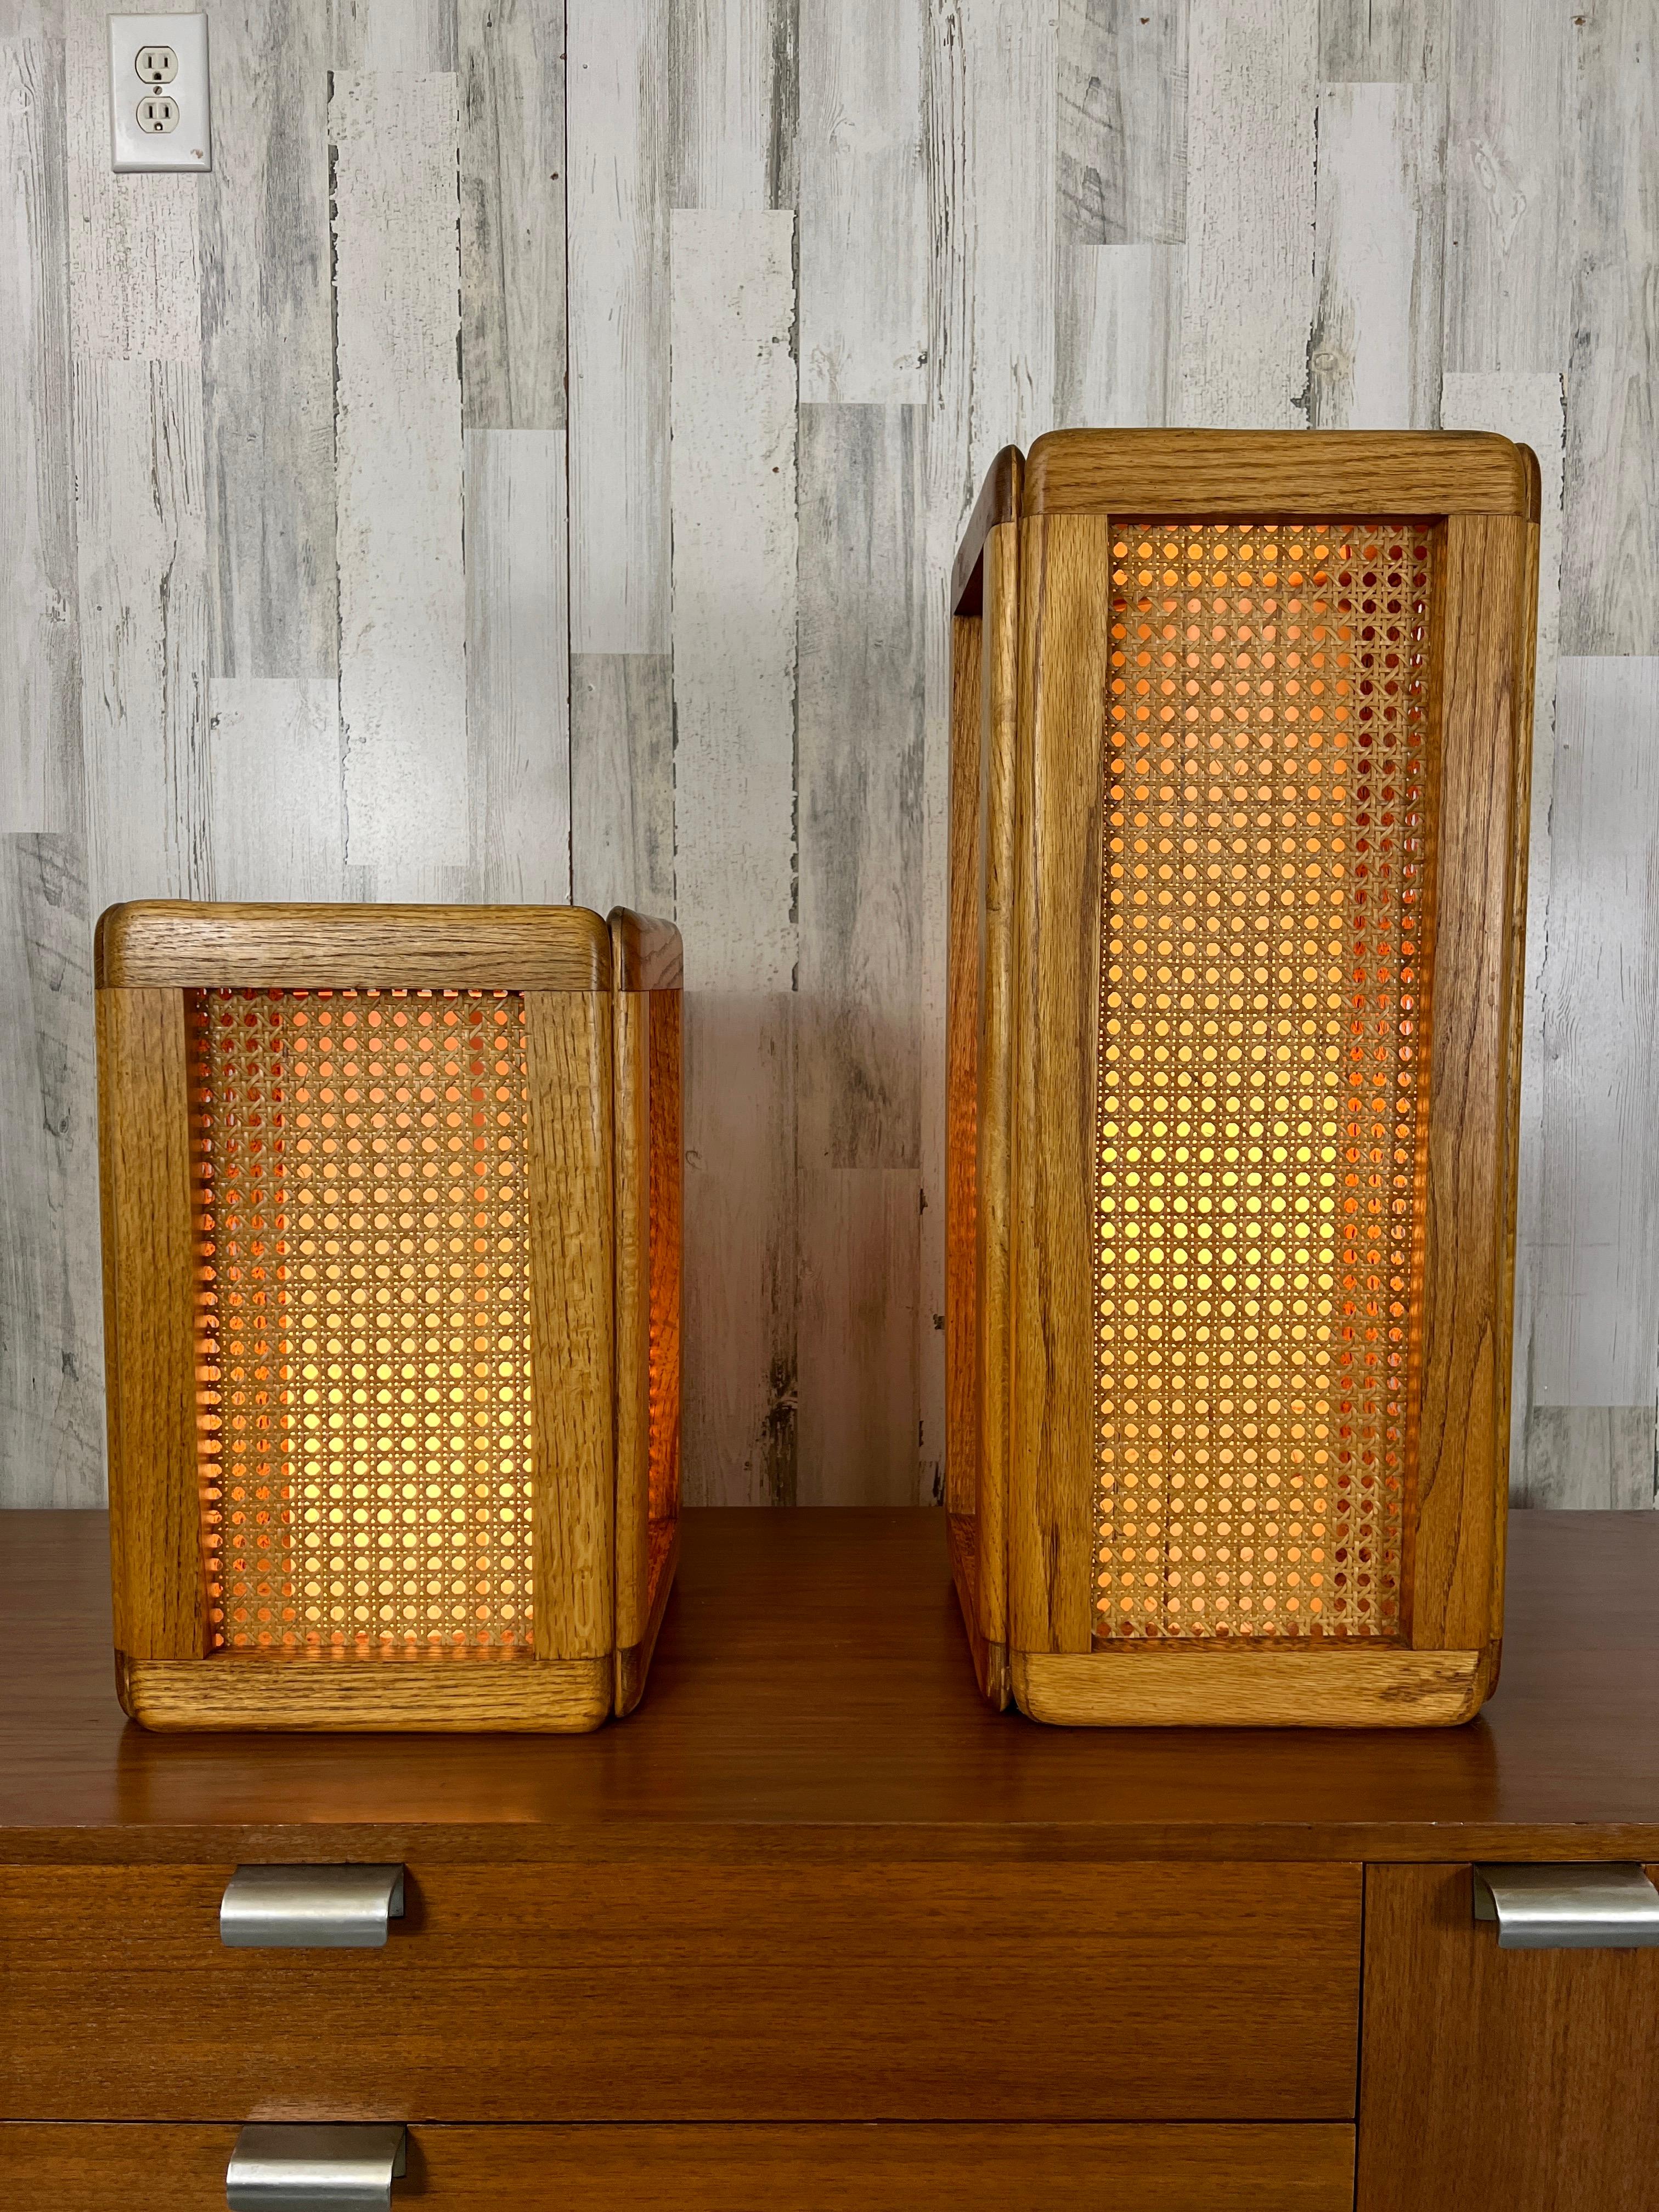 Two Modeline pedestals / table lamps with golden oak frames and cane insert panels. These can be used on the floor as pedestals for art work or as table lamps. The tops are ebonized.


Measurements taller pedestal 10 3/4 by 10 a 3/4 by 26. The